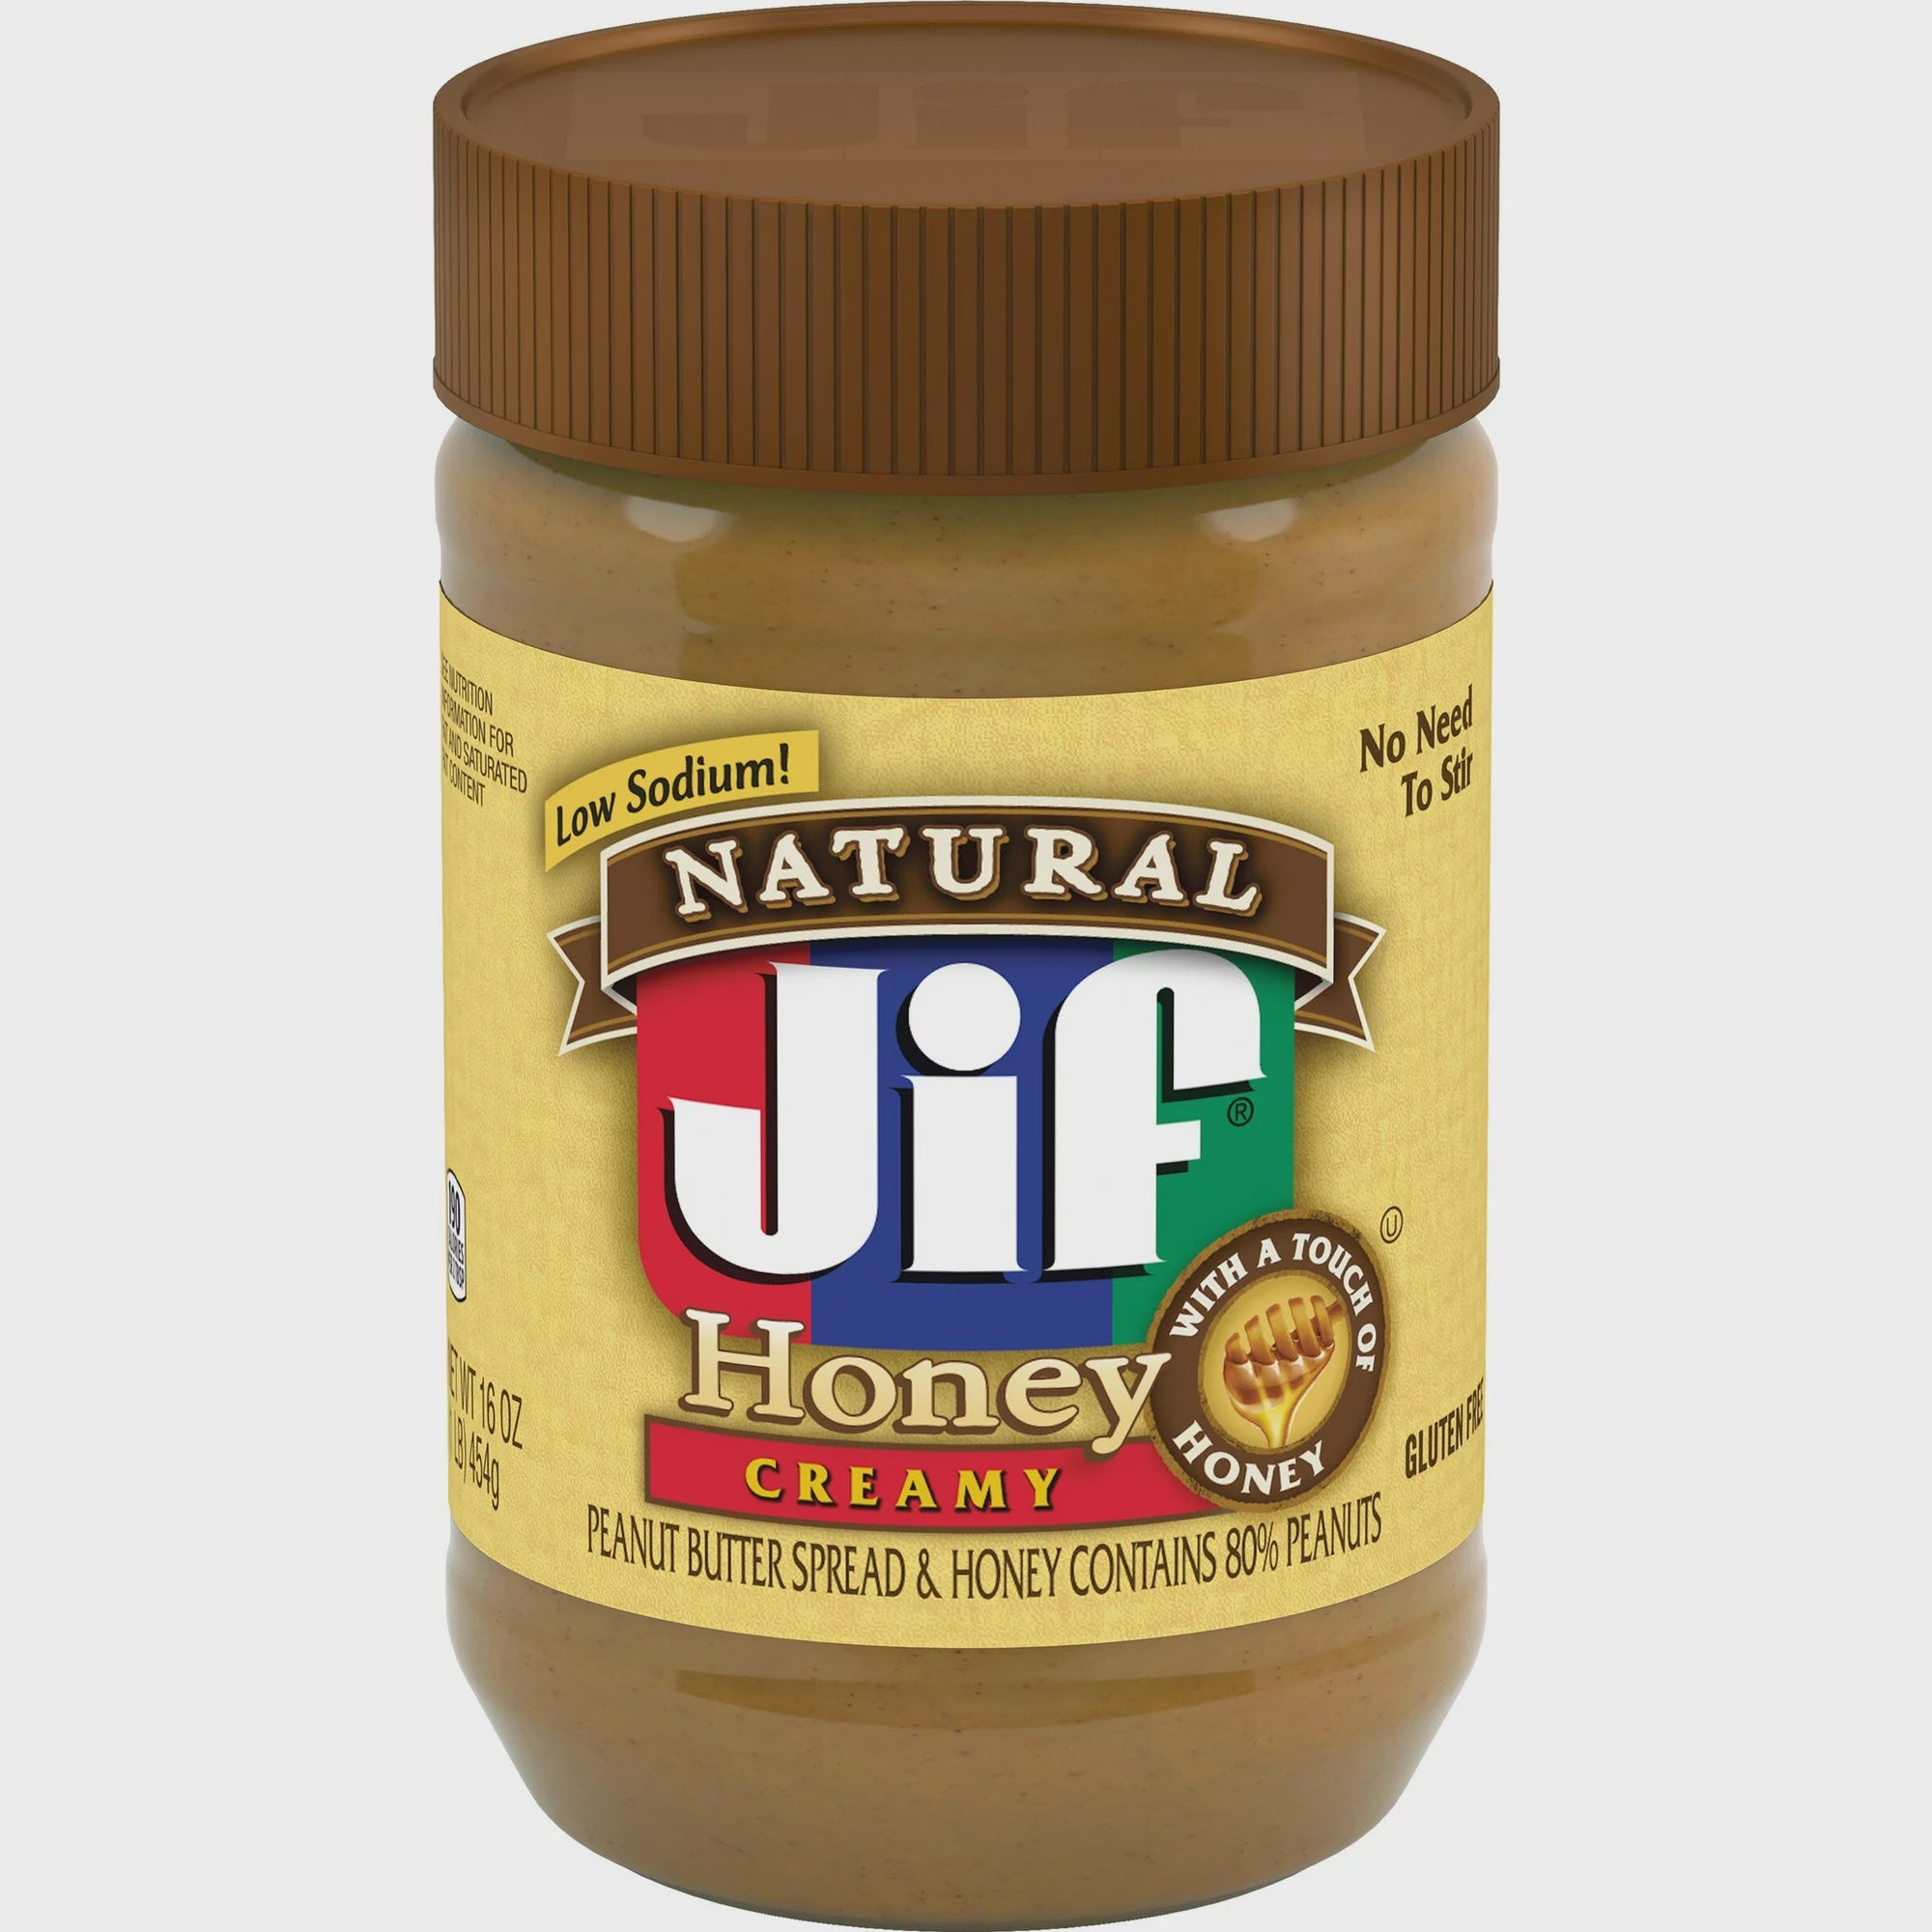 Jif Natural Creamy Peanut Butter with Honey 16 oz.